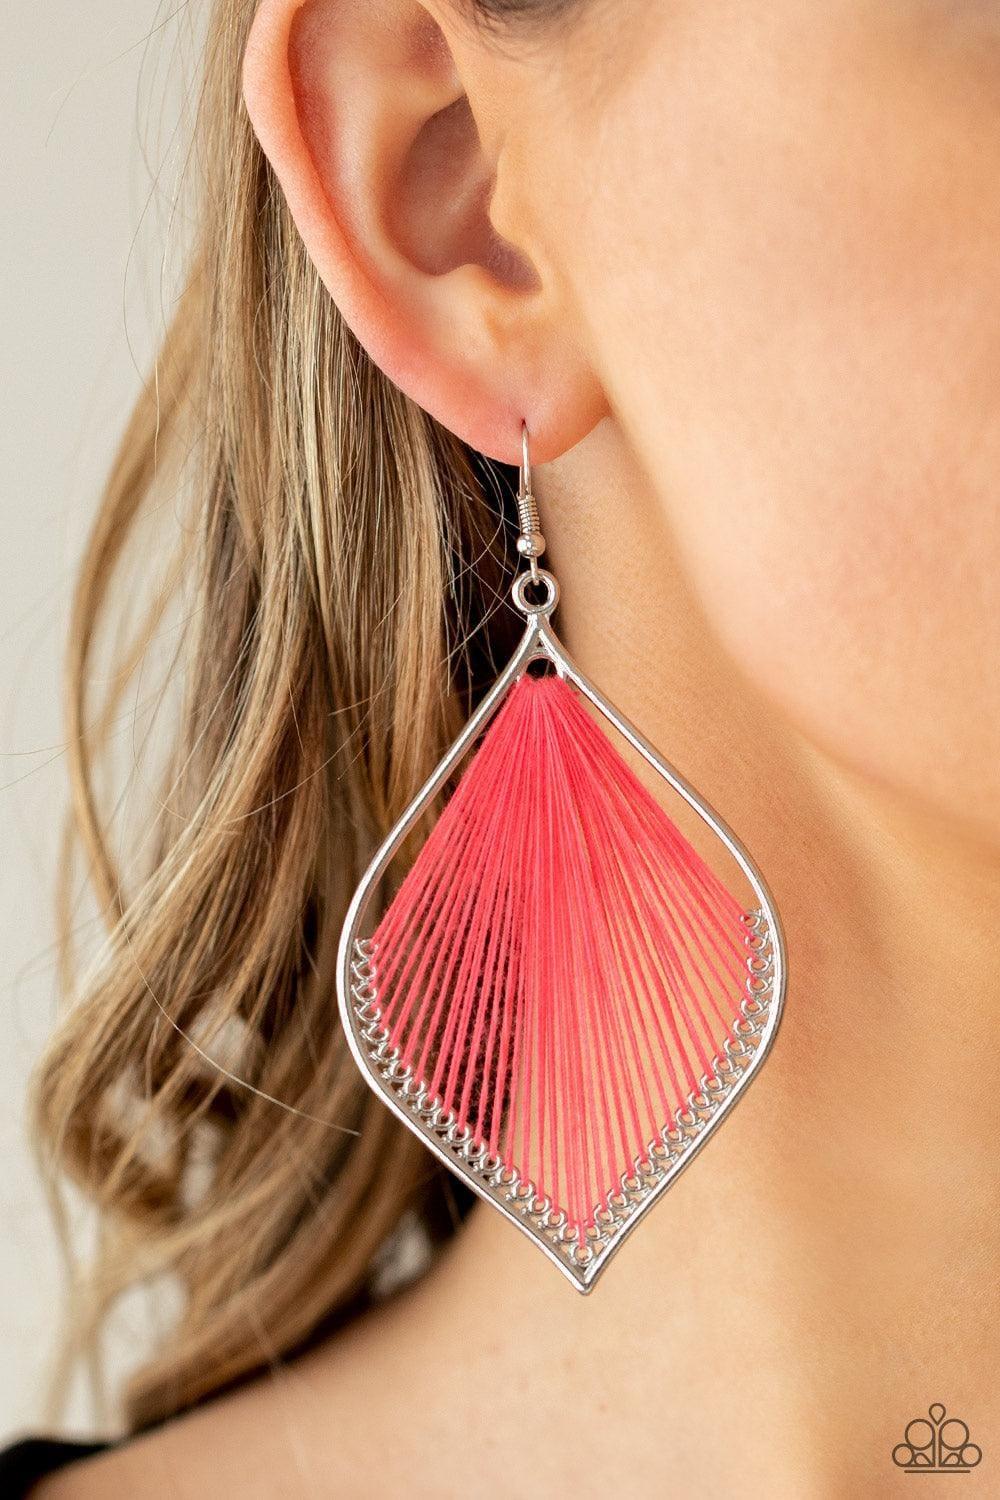 Paparazzi Accessories - String Theory - Pink Earrings - Bling by JessieK